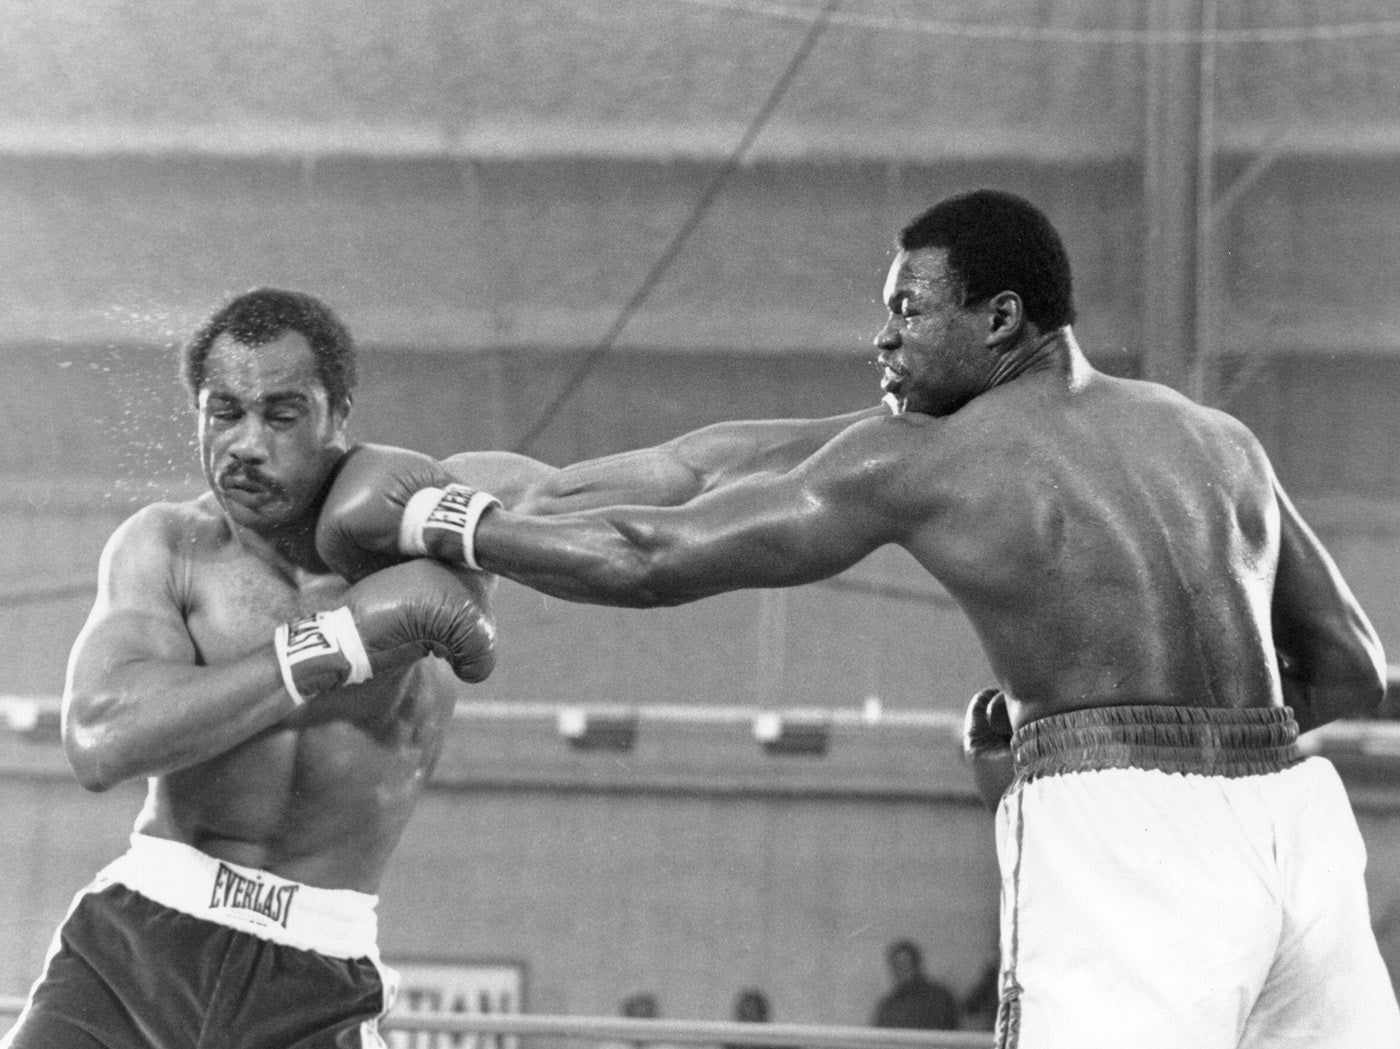 LARRY HOLMES - RISE OF THE EASTON ASSASSIN - FEATURED BLOG WINNER